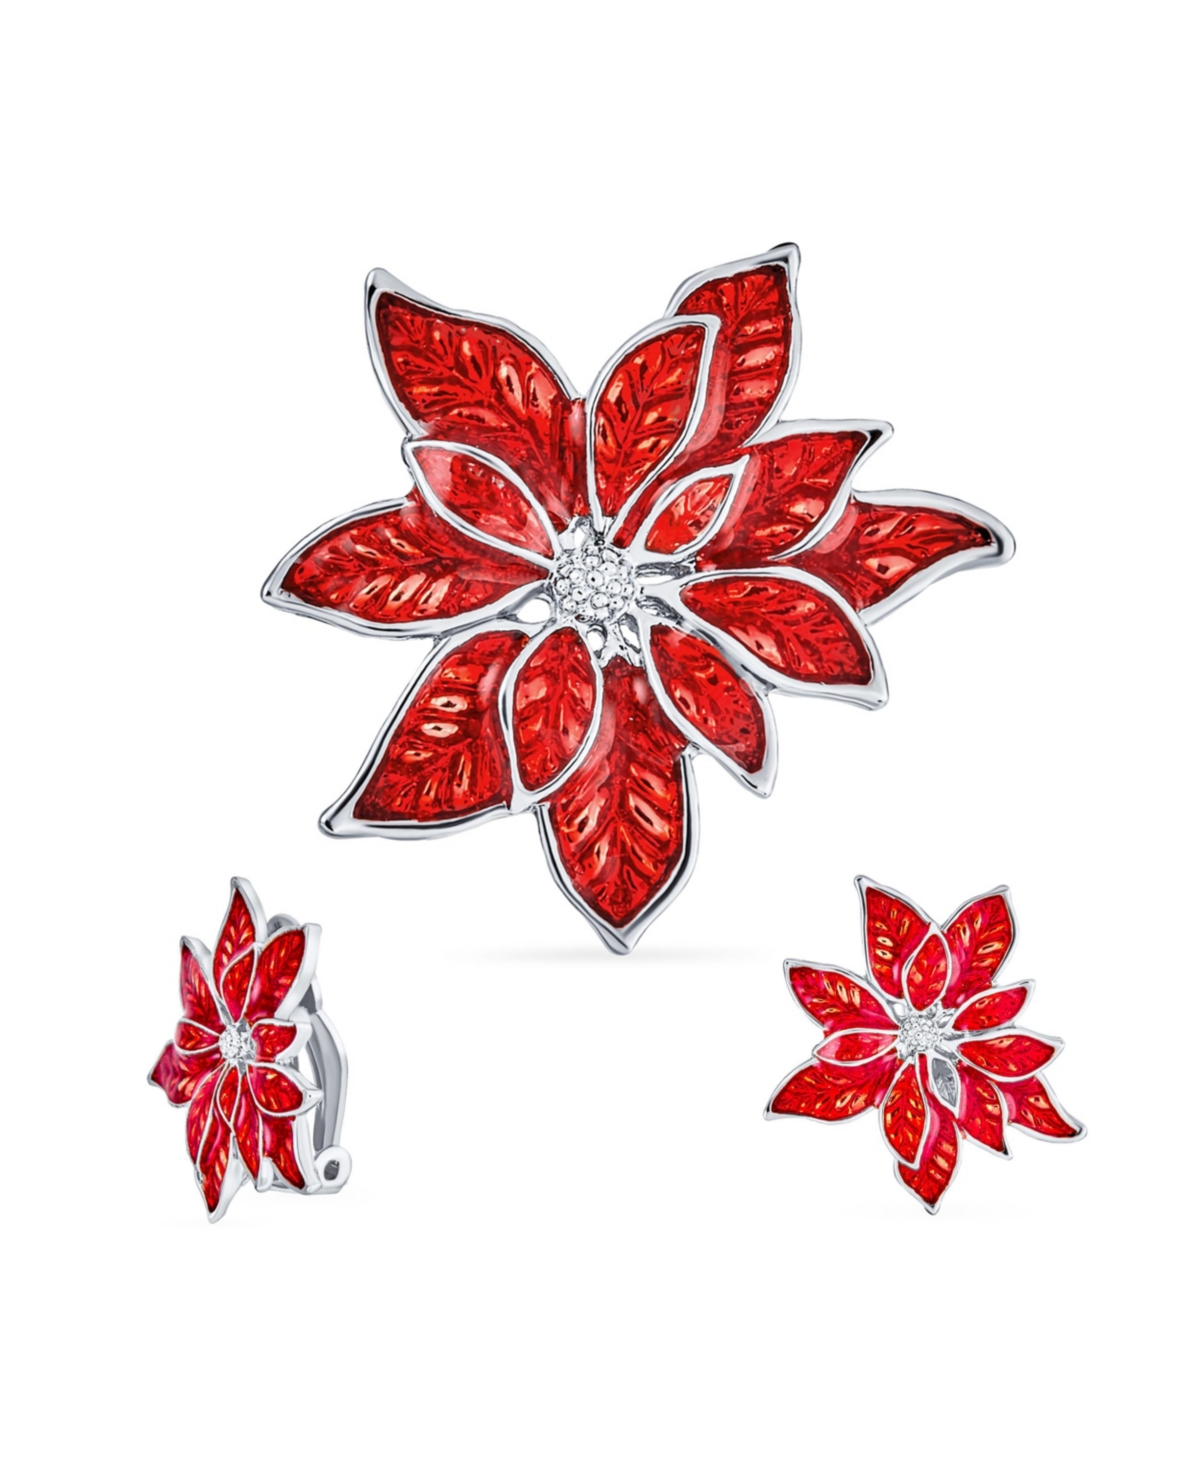 Large Statement Flower Holiday Party White Red Enamel Poinsettia Brooch Clip On Earrings Christmas Scarf Pin Jewelry Set For Women - Gold set